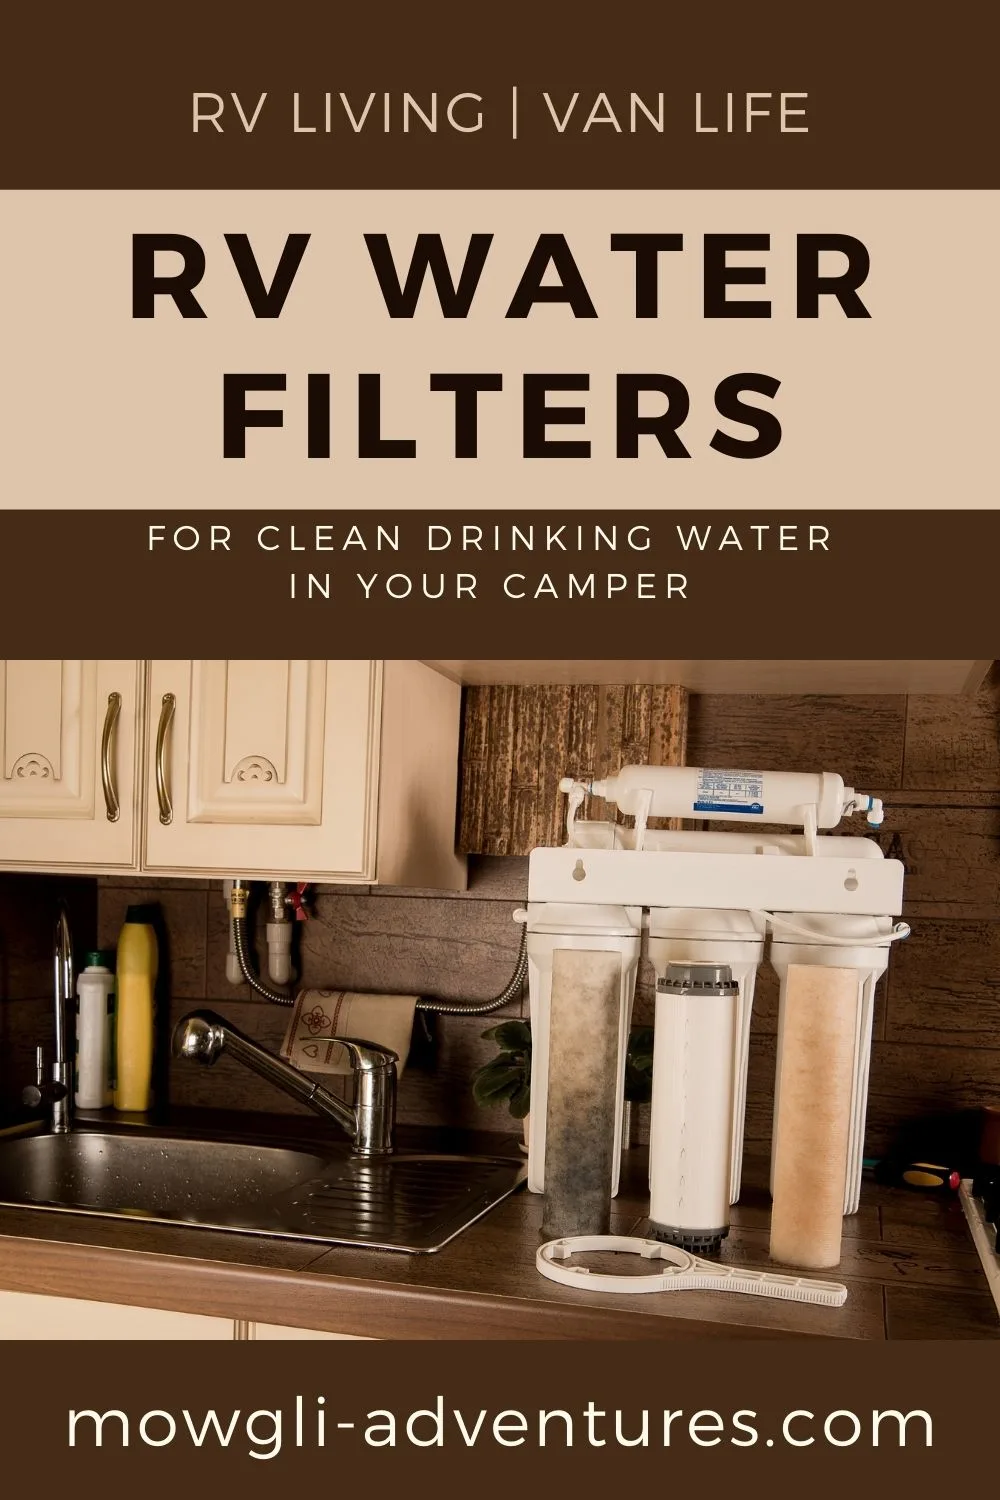 RV Water filters on Pinterest